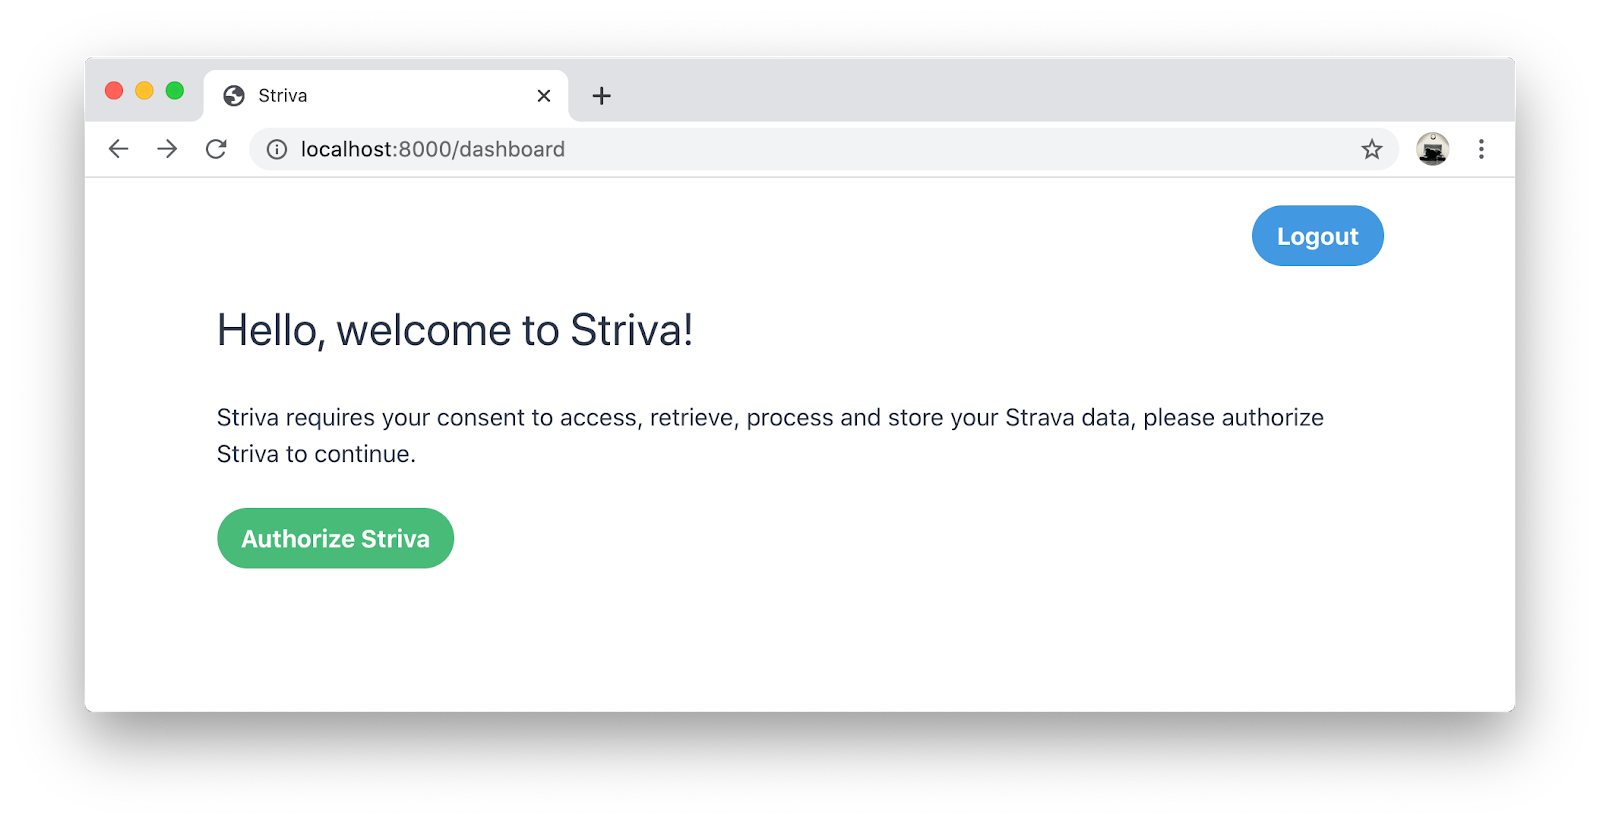 The welcome page from Striva